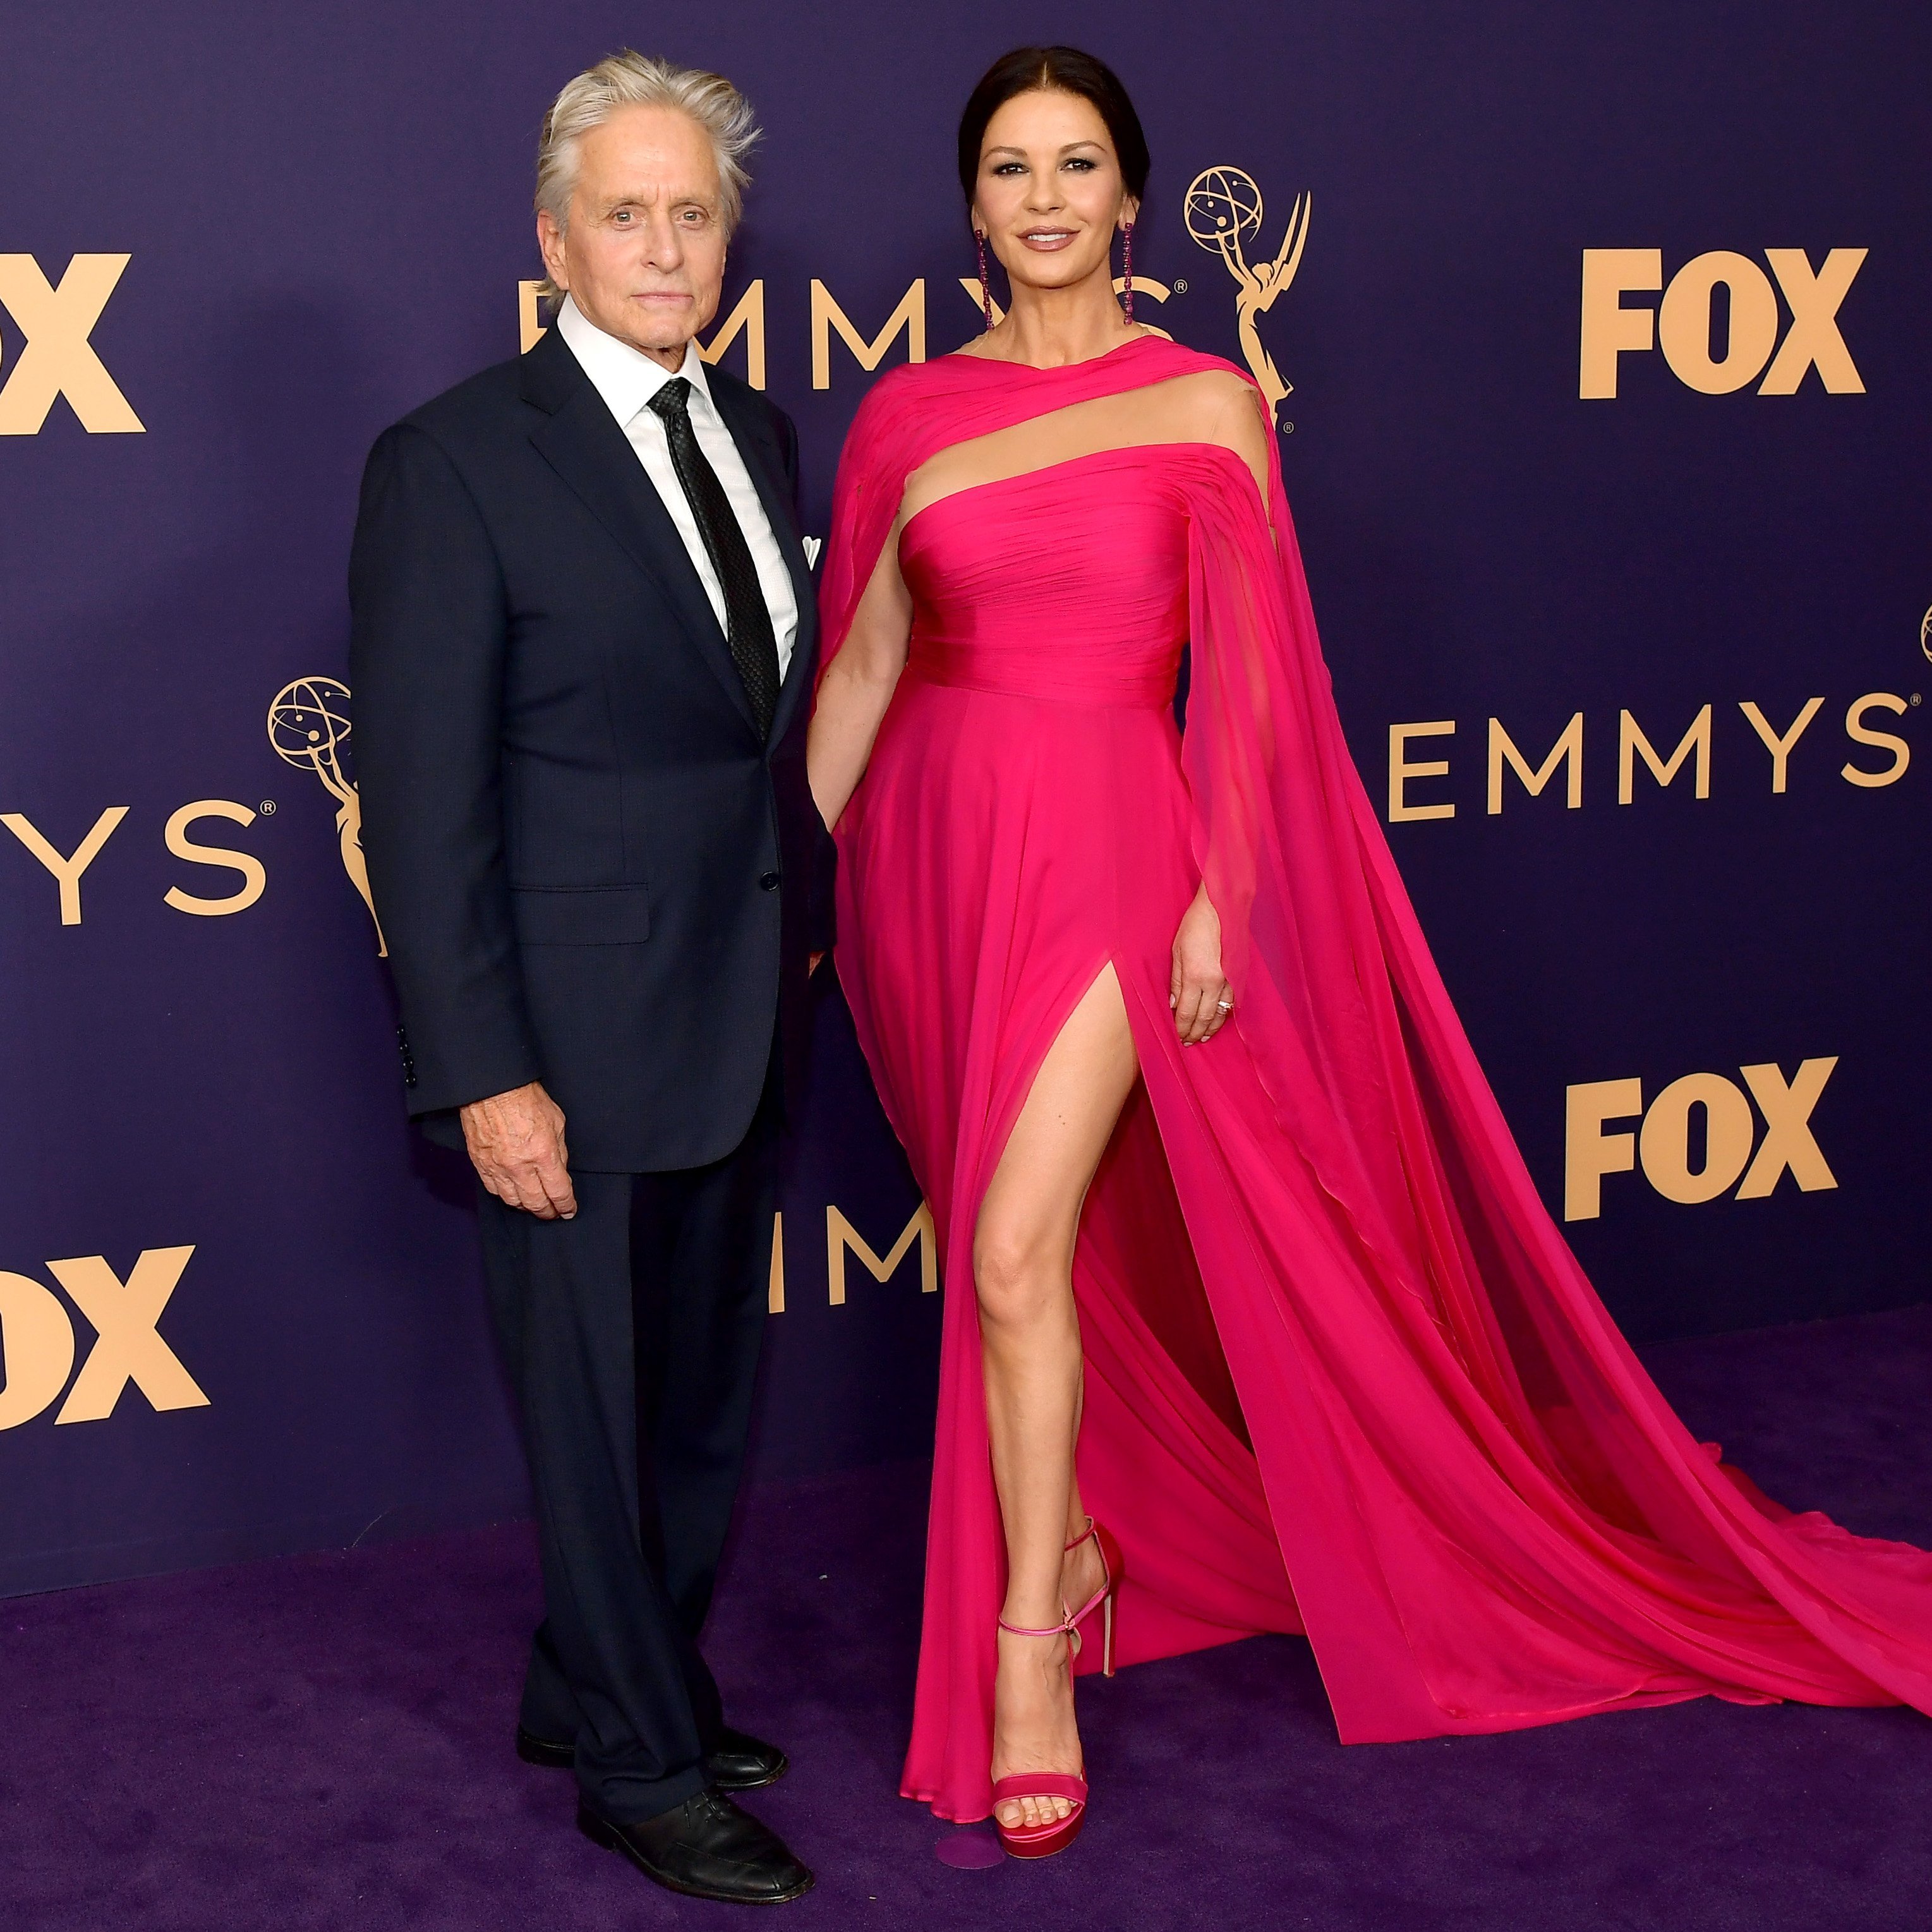 Michael Douglas and Catherine Zeta-Jones attends the 71st Emmy Awards in Los Angeles, California on September 22, 2019 | Photo: Getty Images